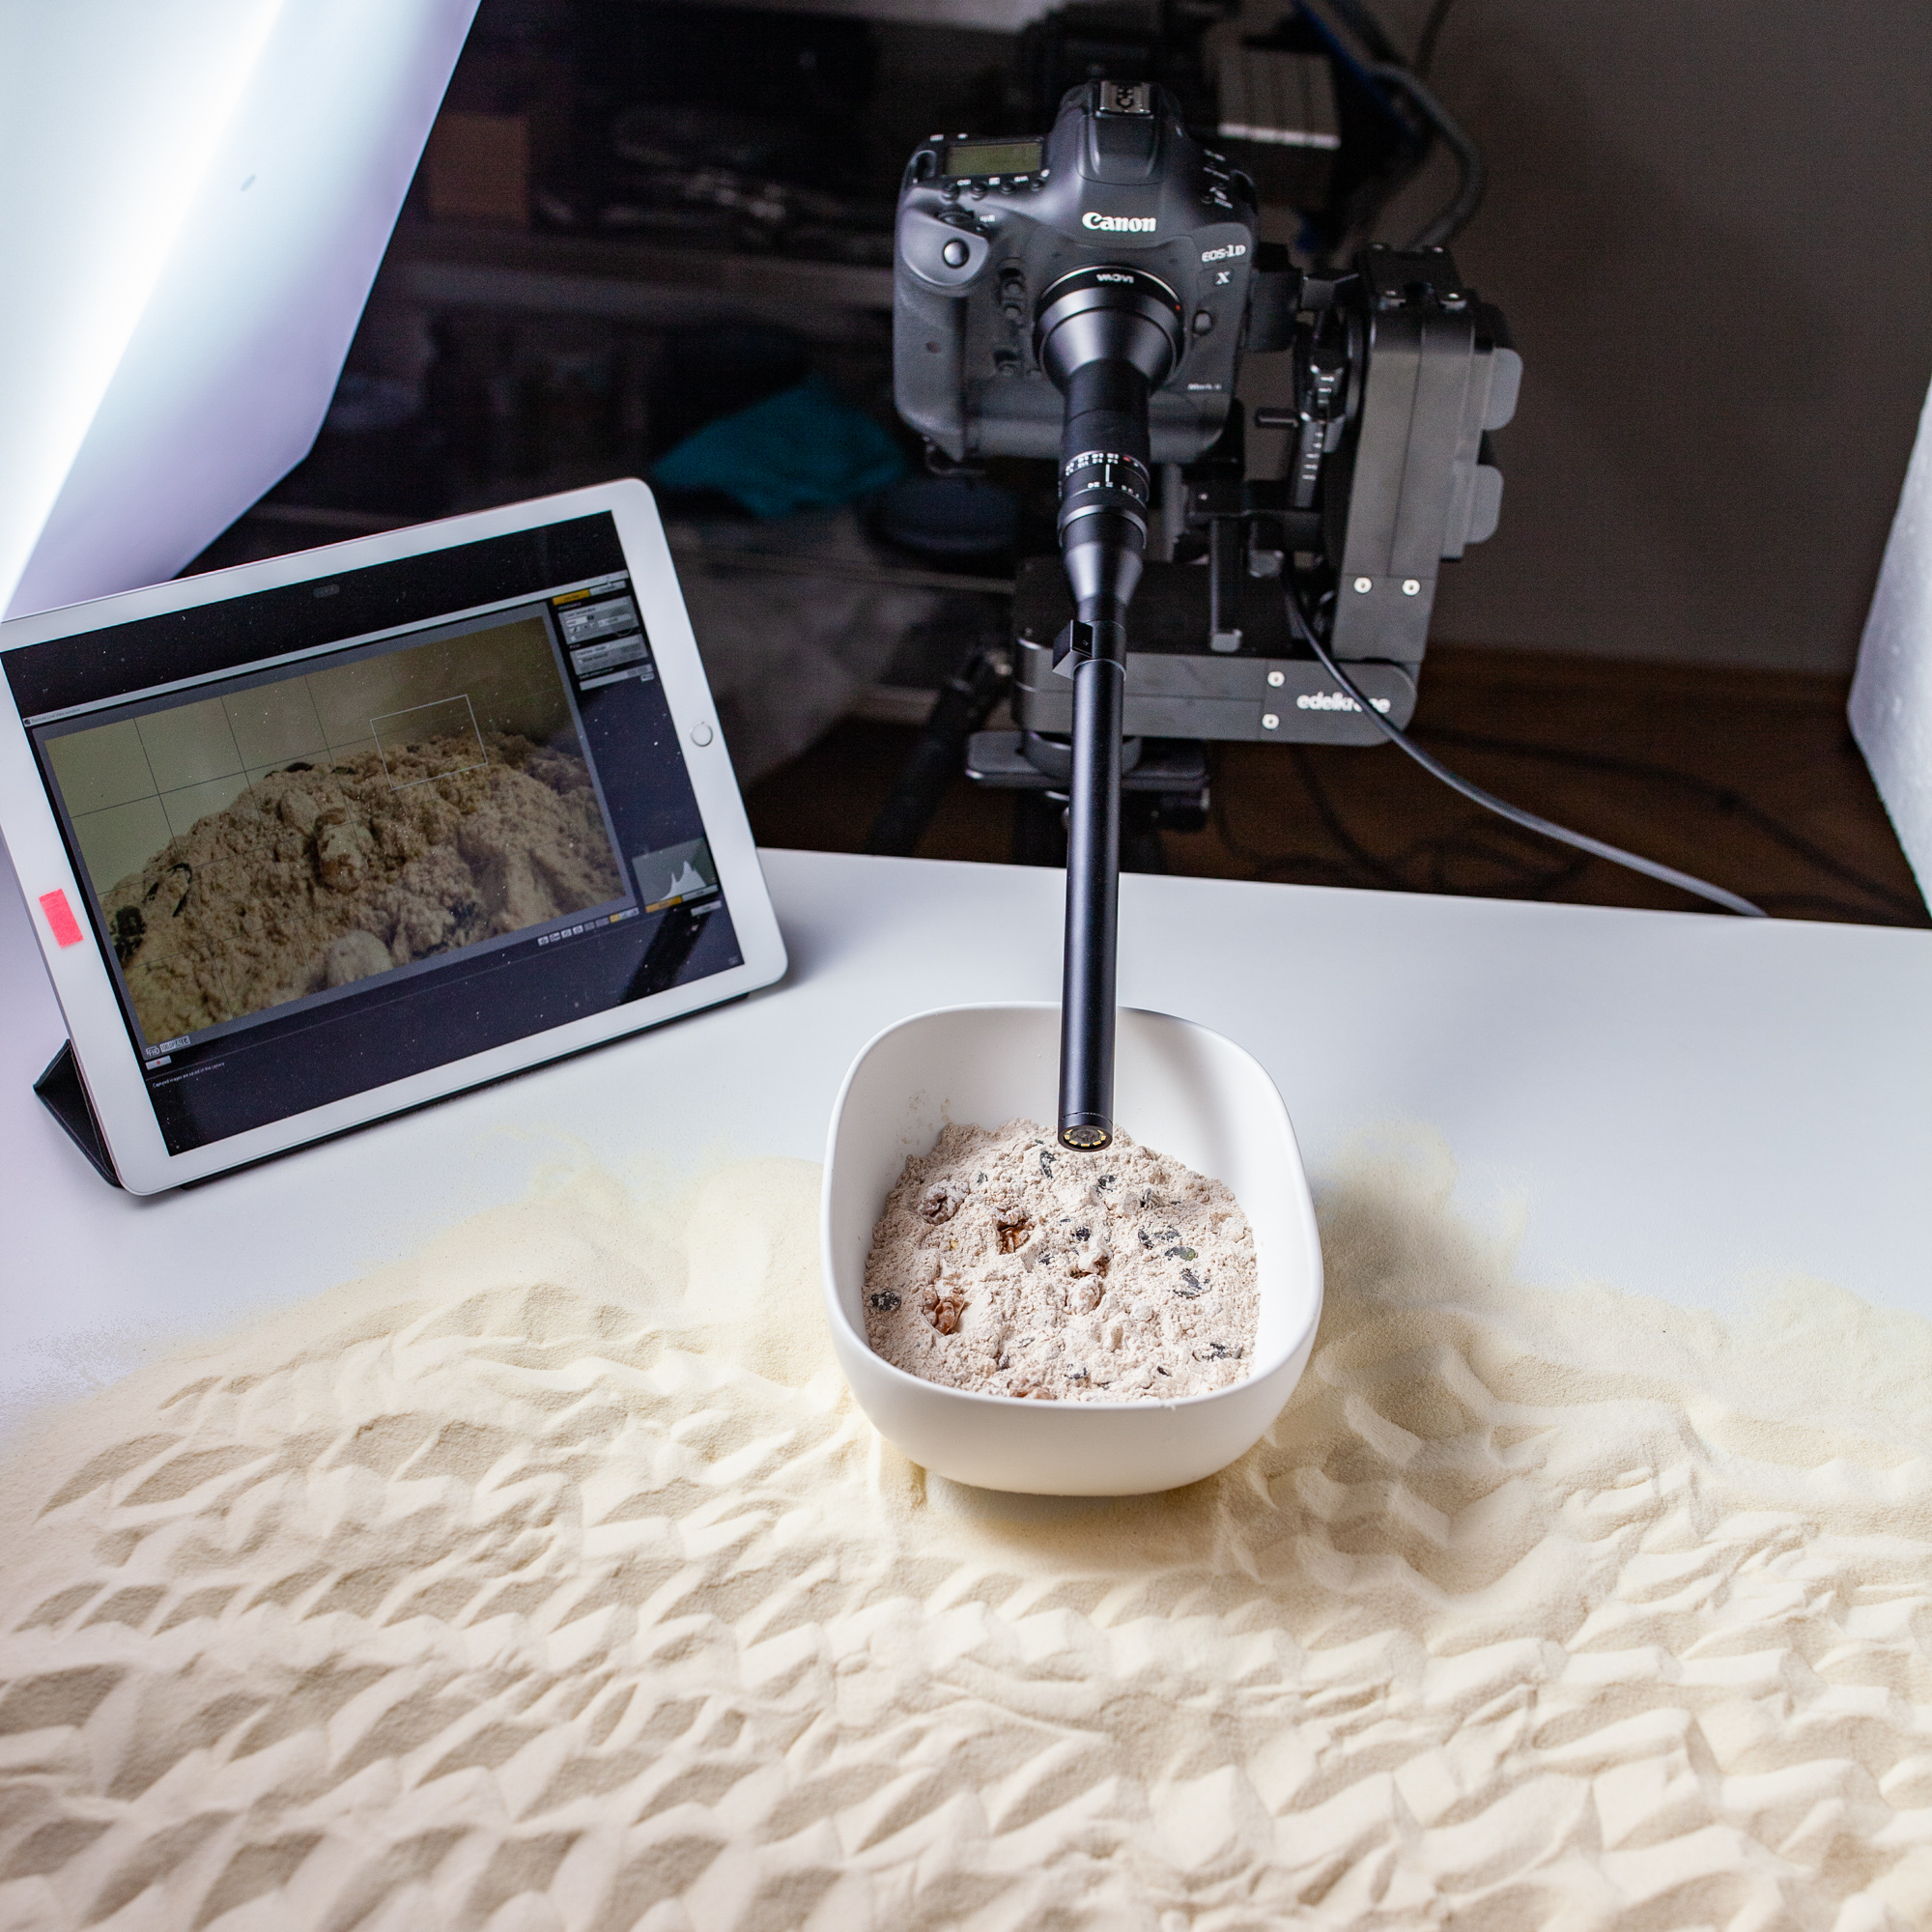 Behind the scenes of foodlydoodlydoo's vegan banana bread recipe. The photo shows the setup of a scene.